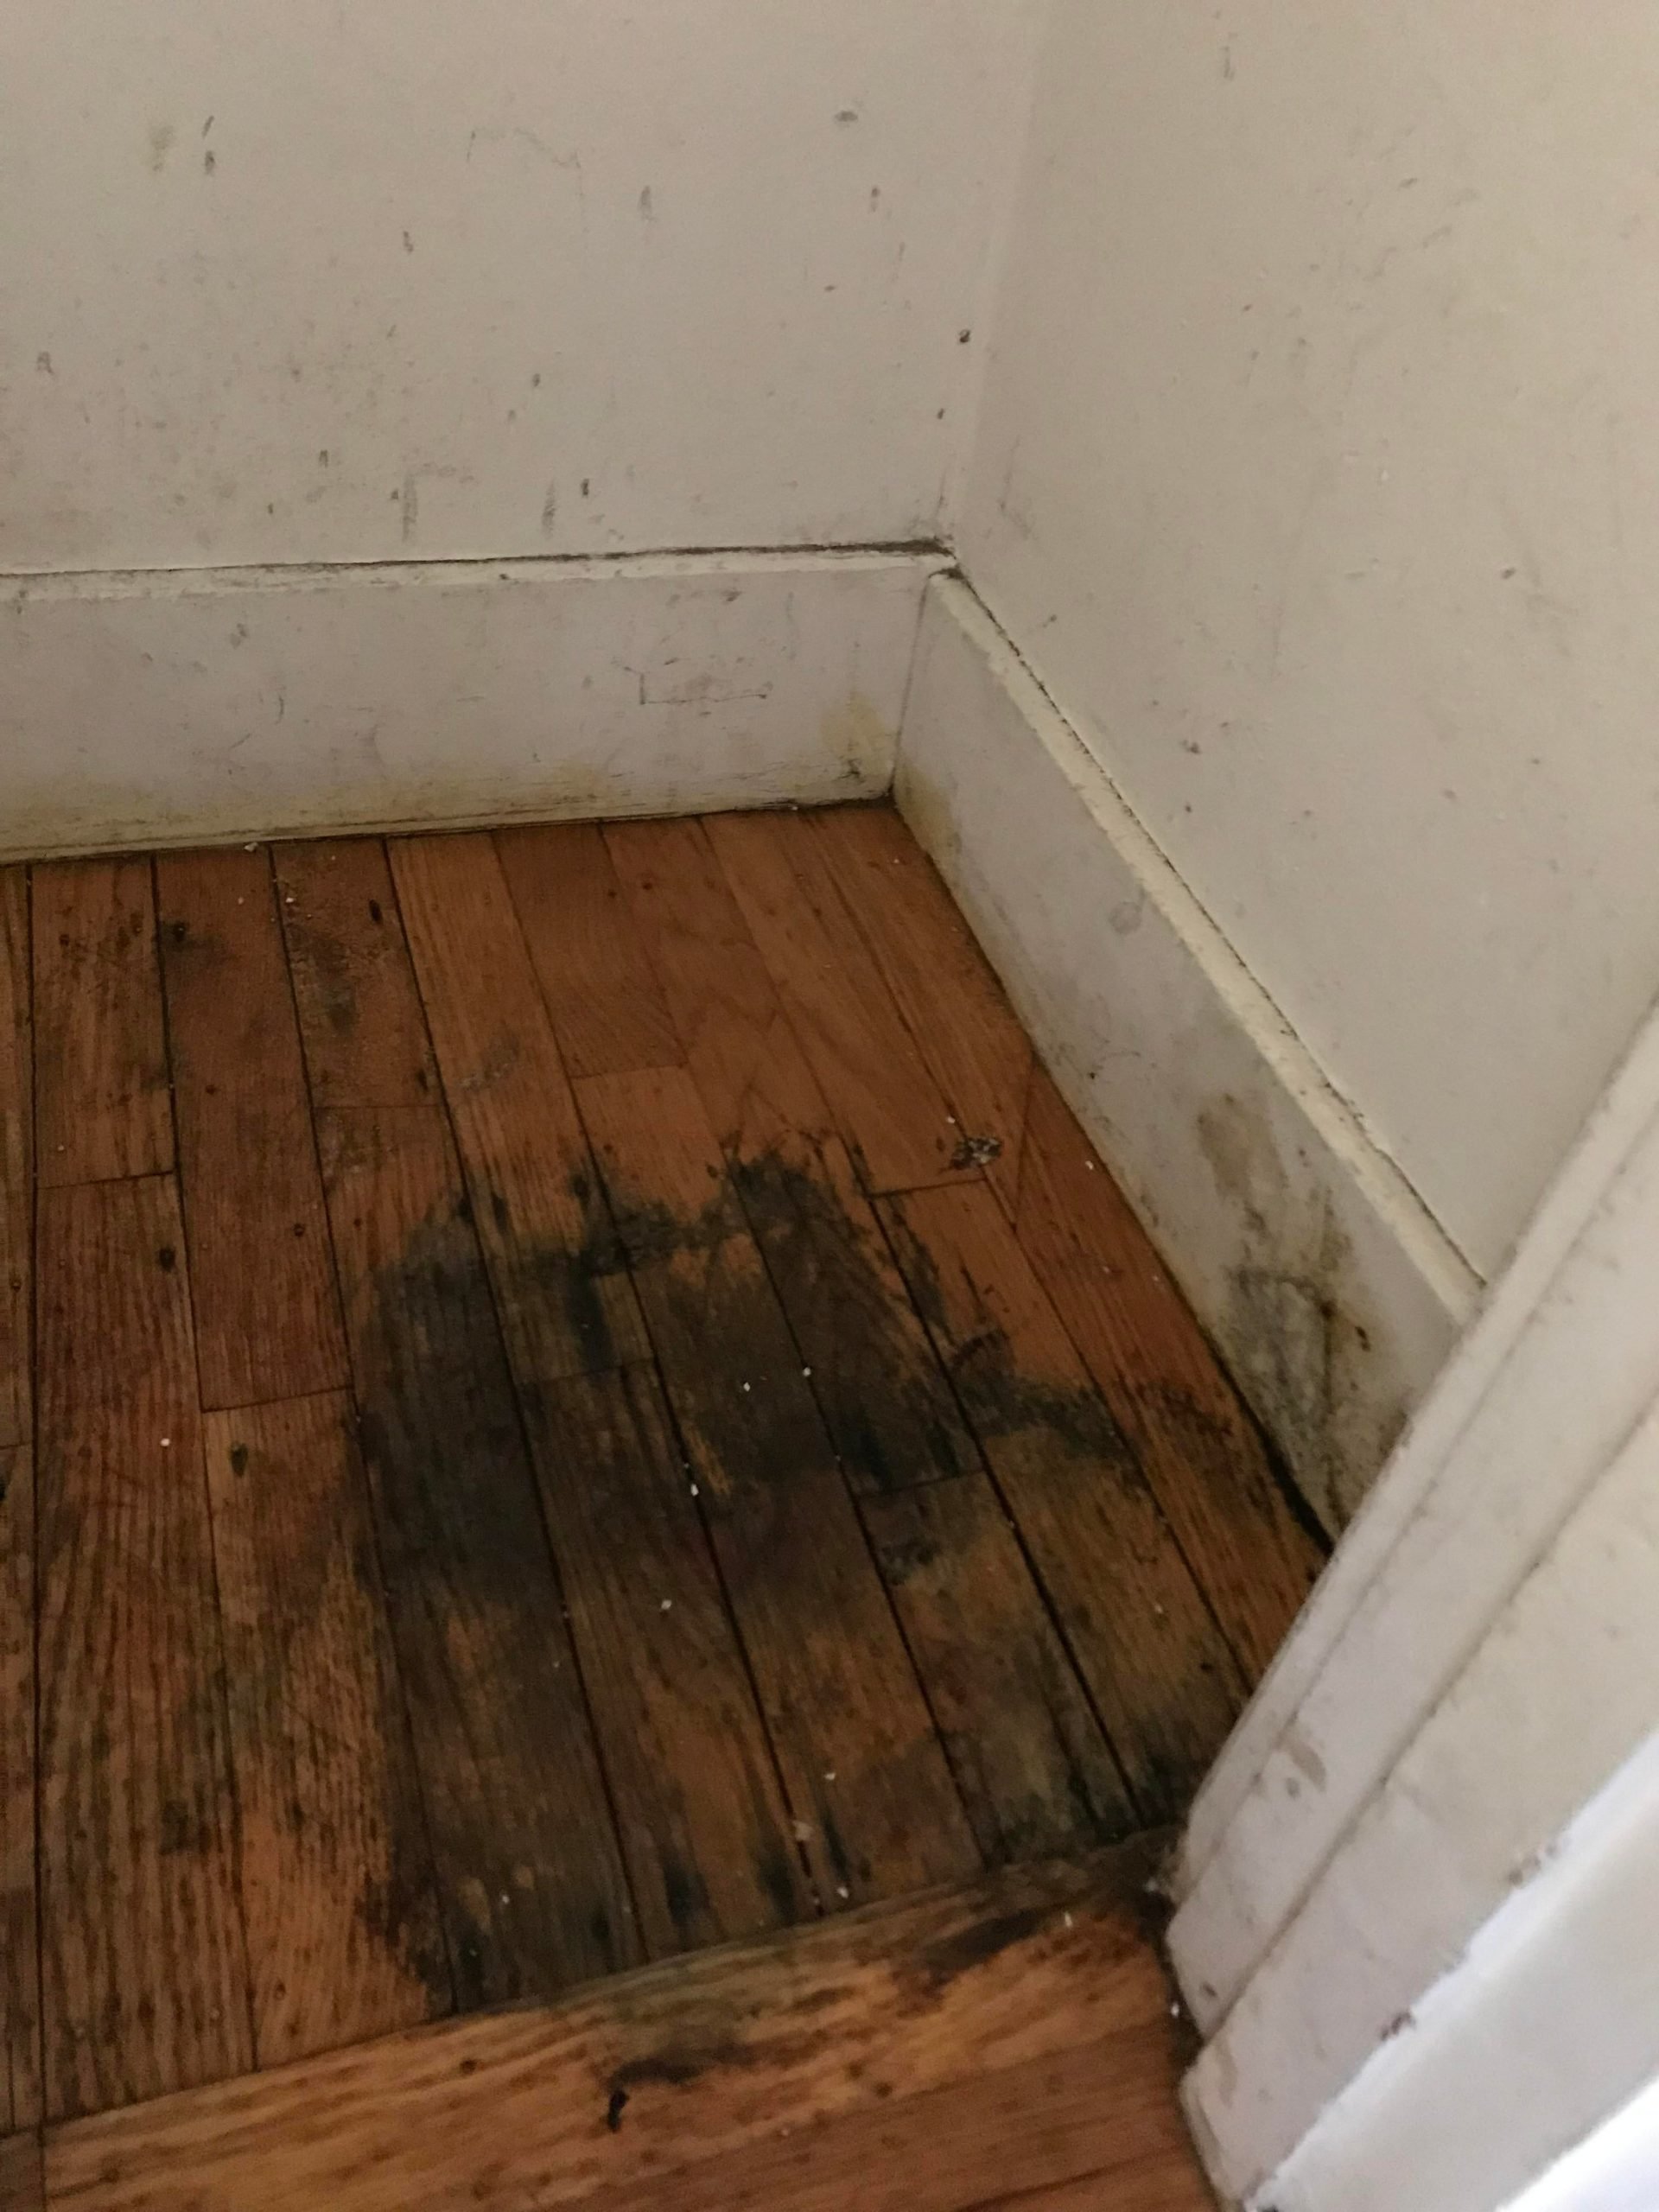 How to get rid of mold on floorboards? : howto